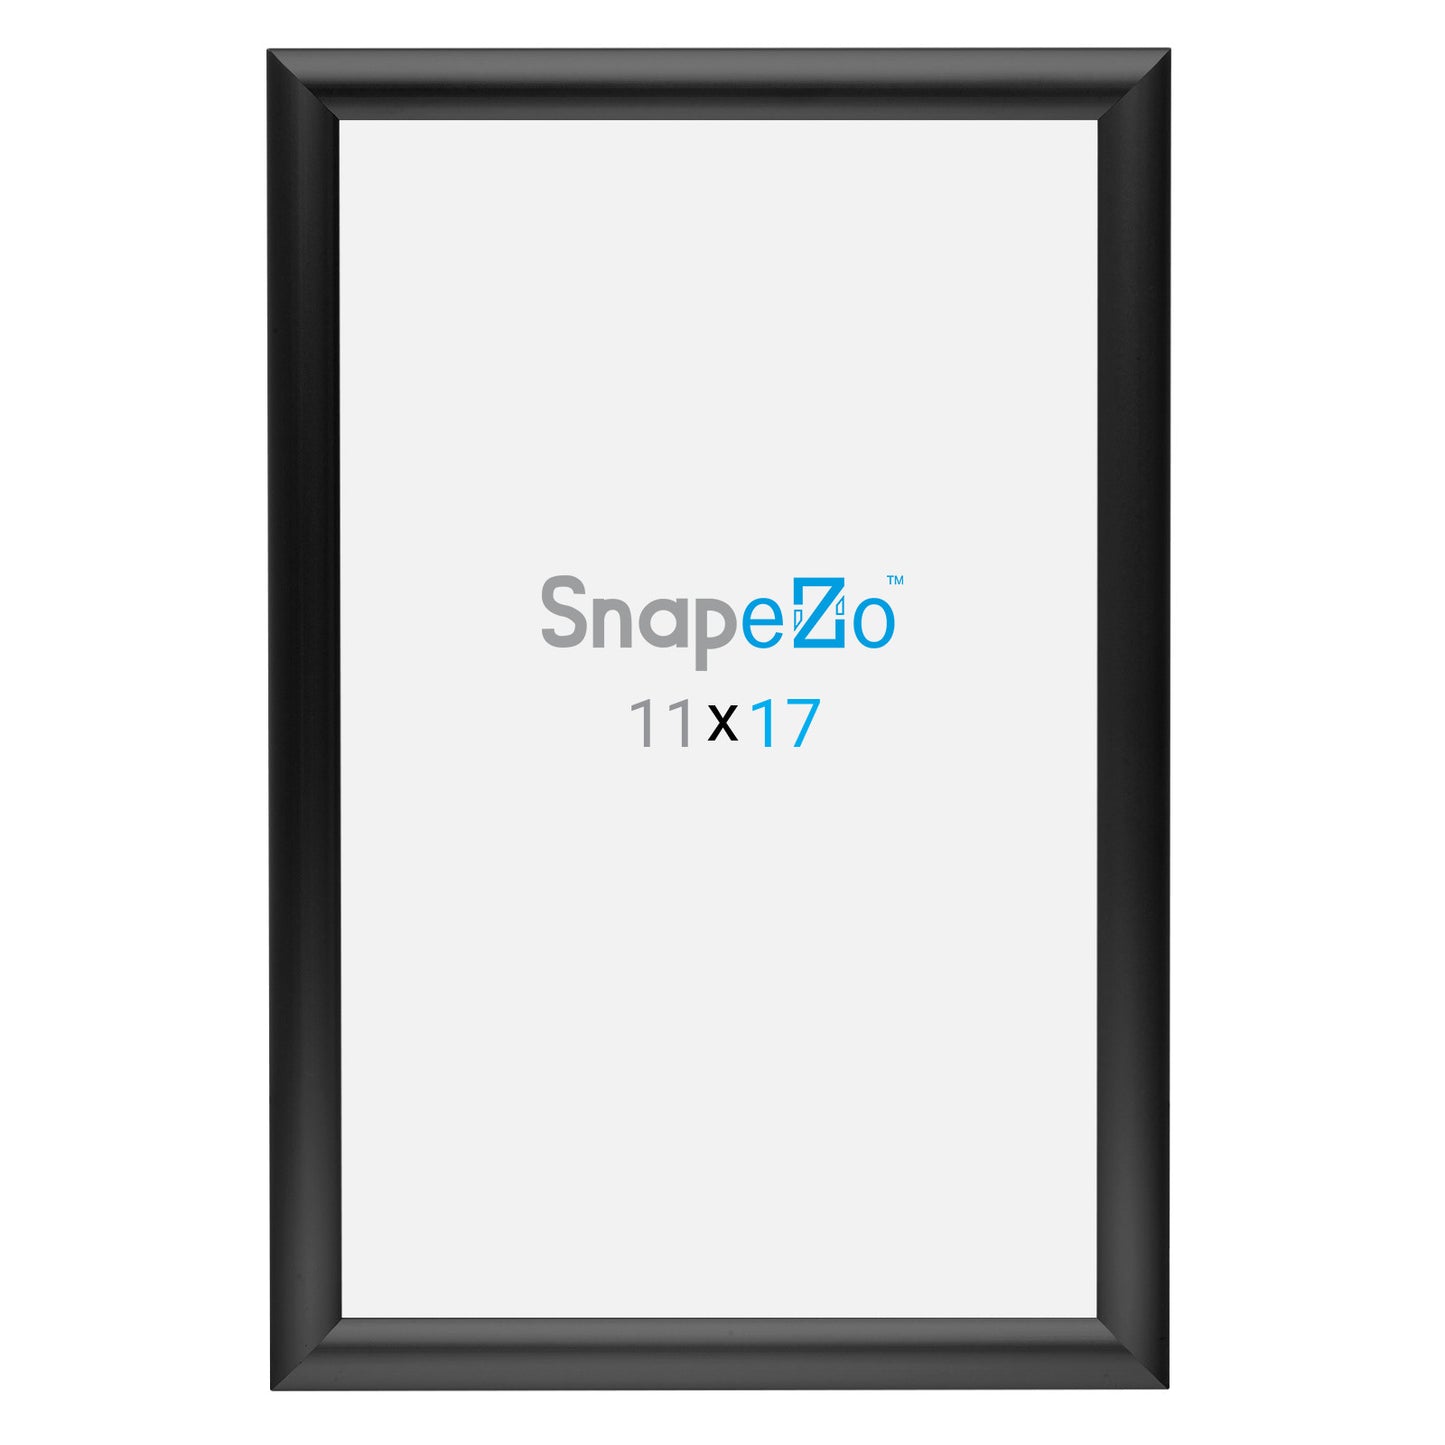 Twin-Pack of Snapezo® Black 11x17 Diploma Frame - 1" Profile